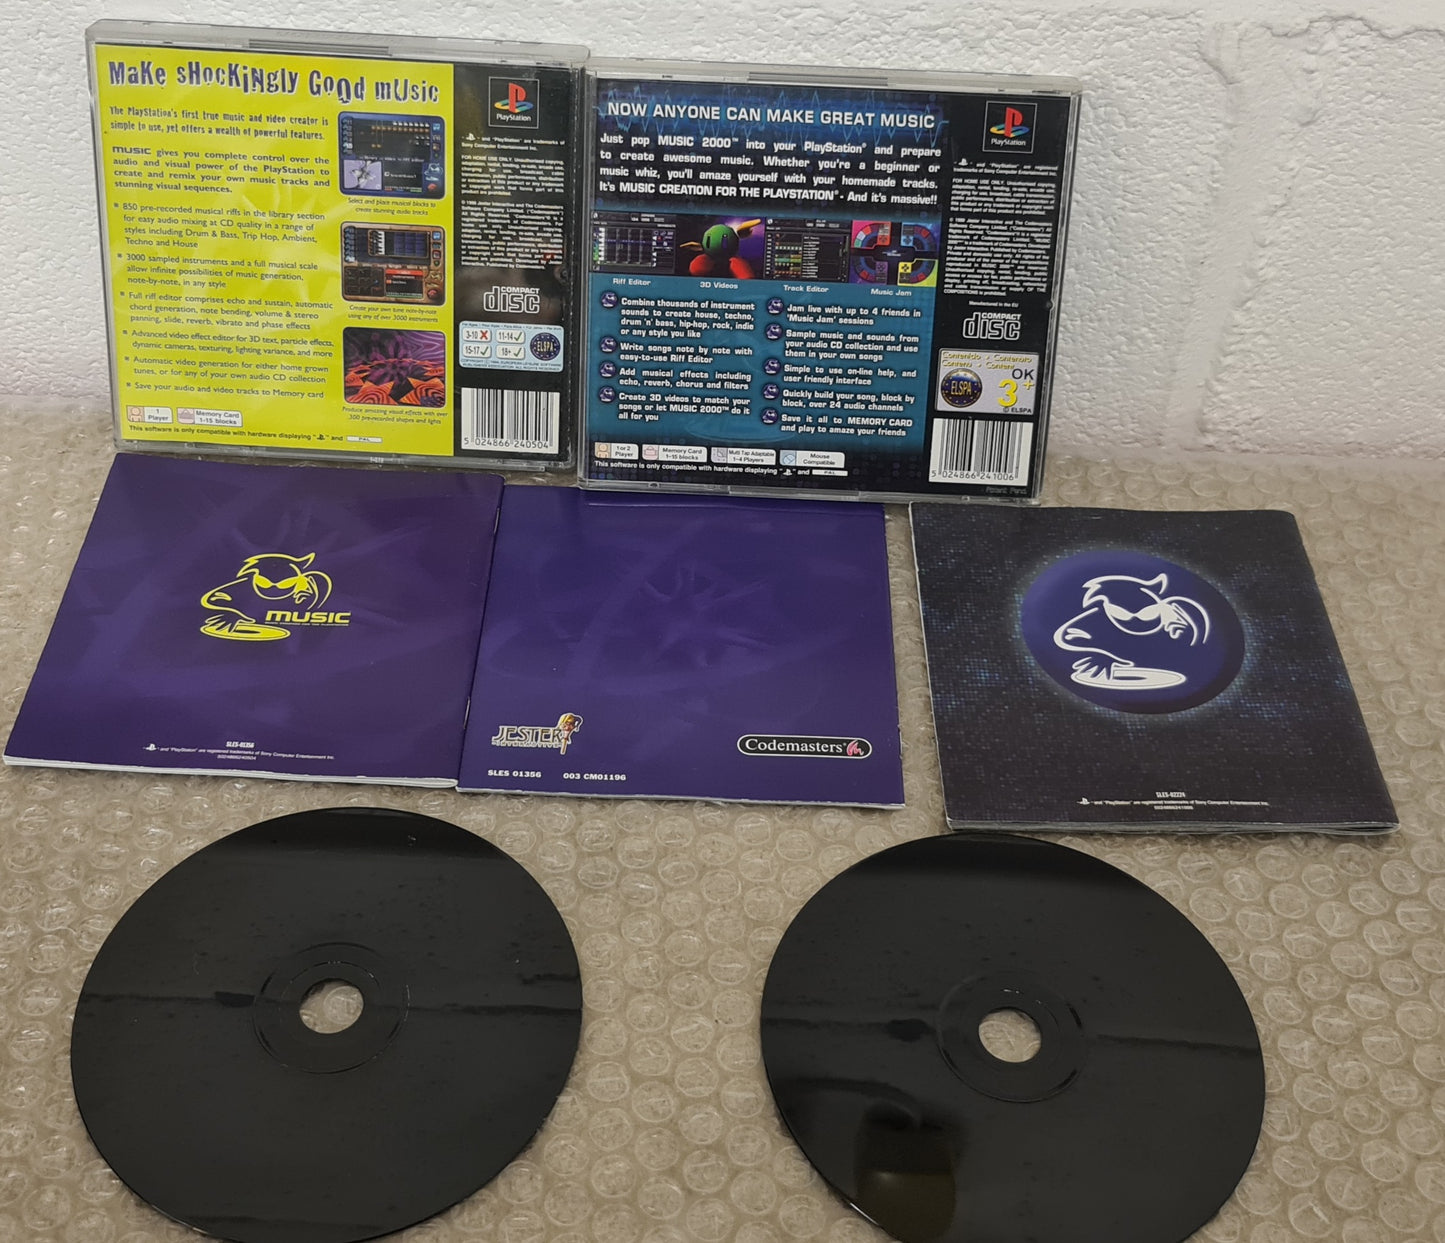 Music & Music 2000 Sony Playstation 1 (PS1) Game Bundle